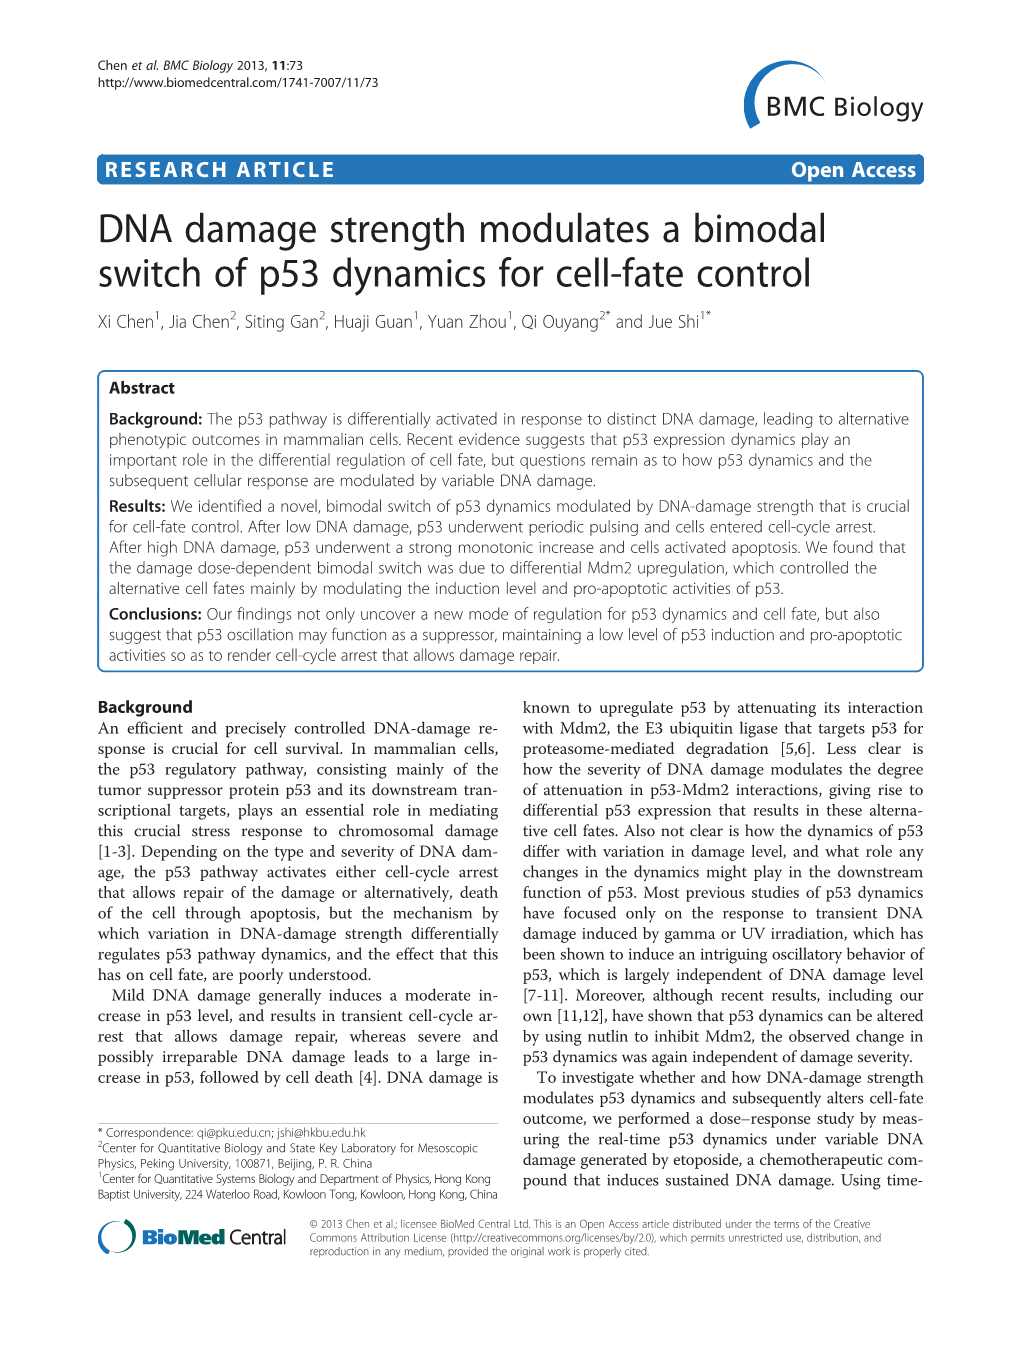 DNA Damage Strength Modulates a Bimodal Switch of P53 Dynamics For